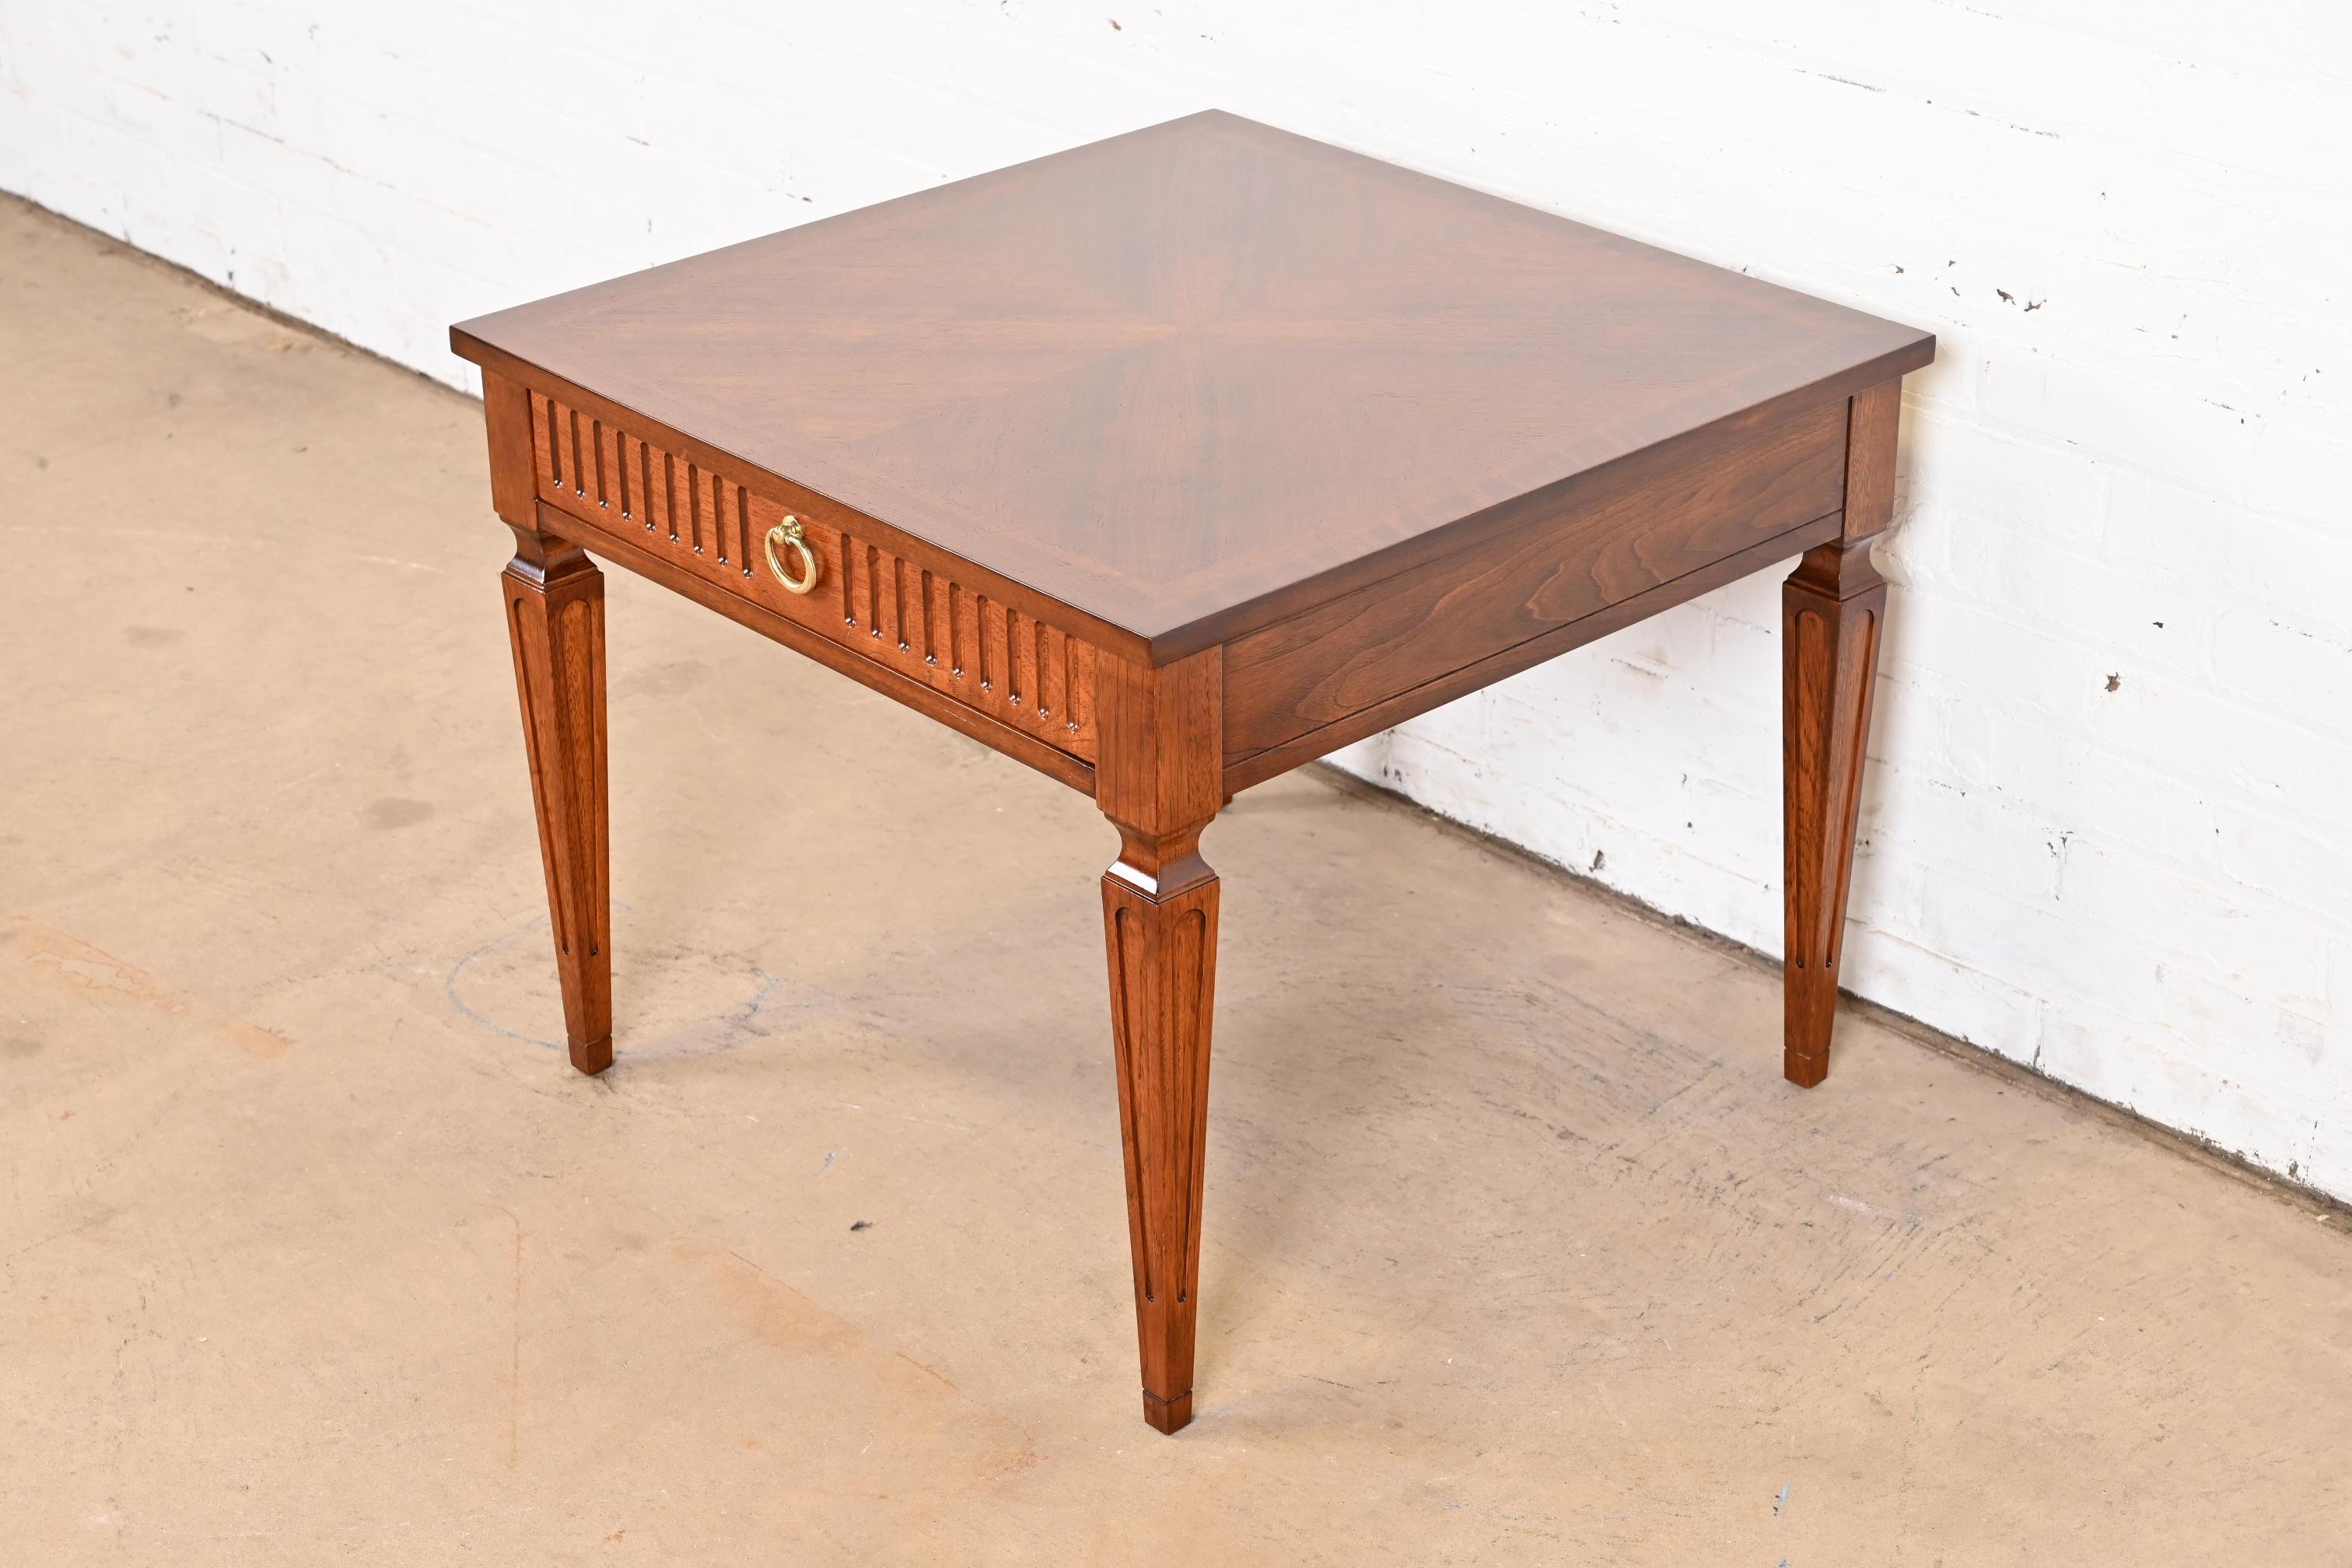 A gorgeous French Regency Louis XVI style nightstand, tea table, or end table

By Baker Furniture, 